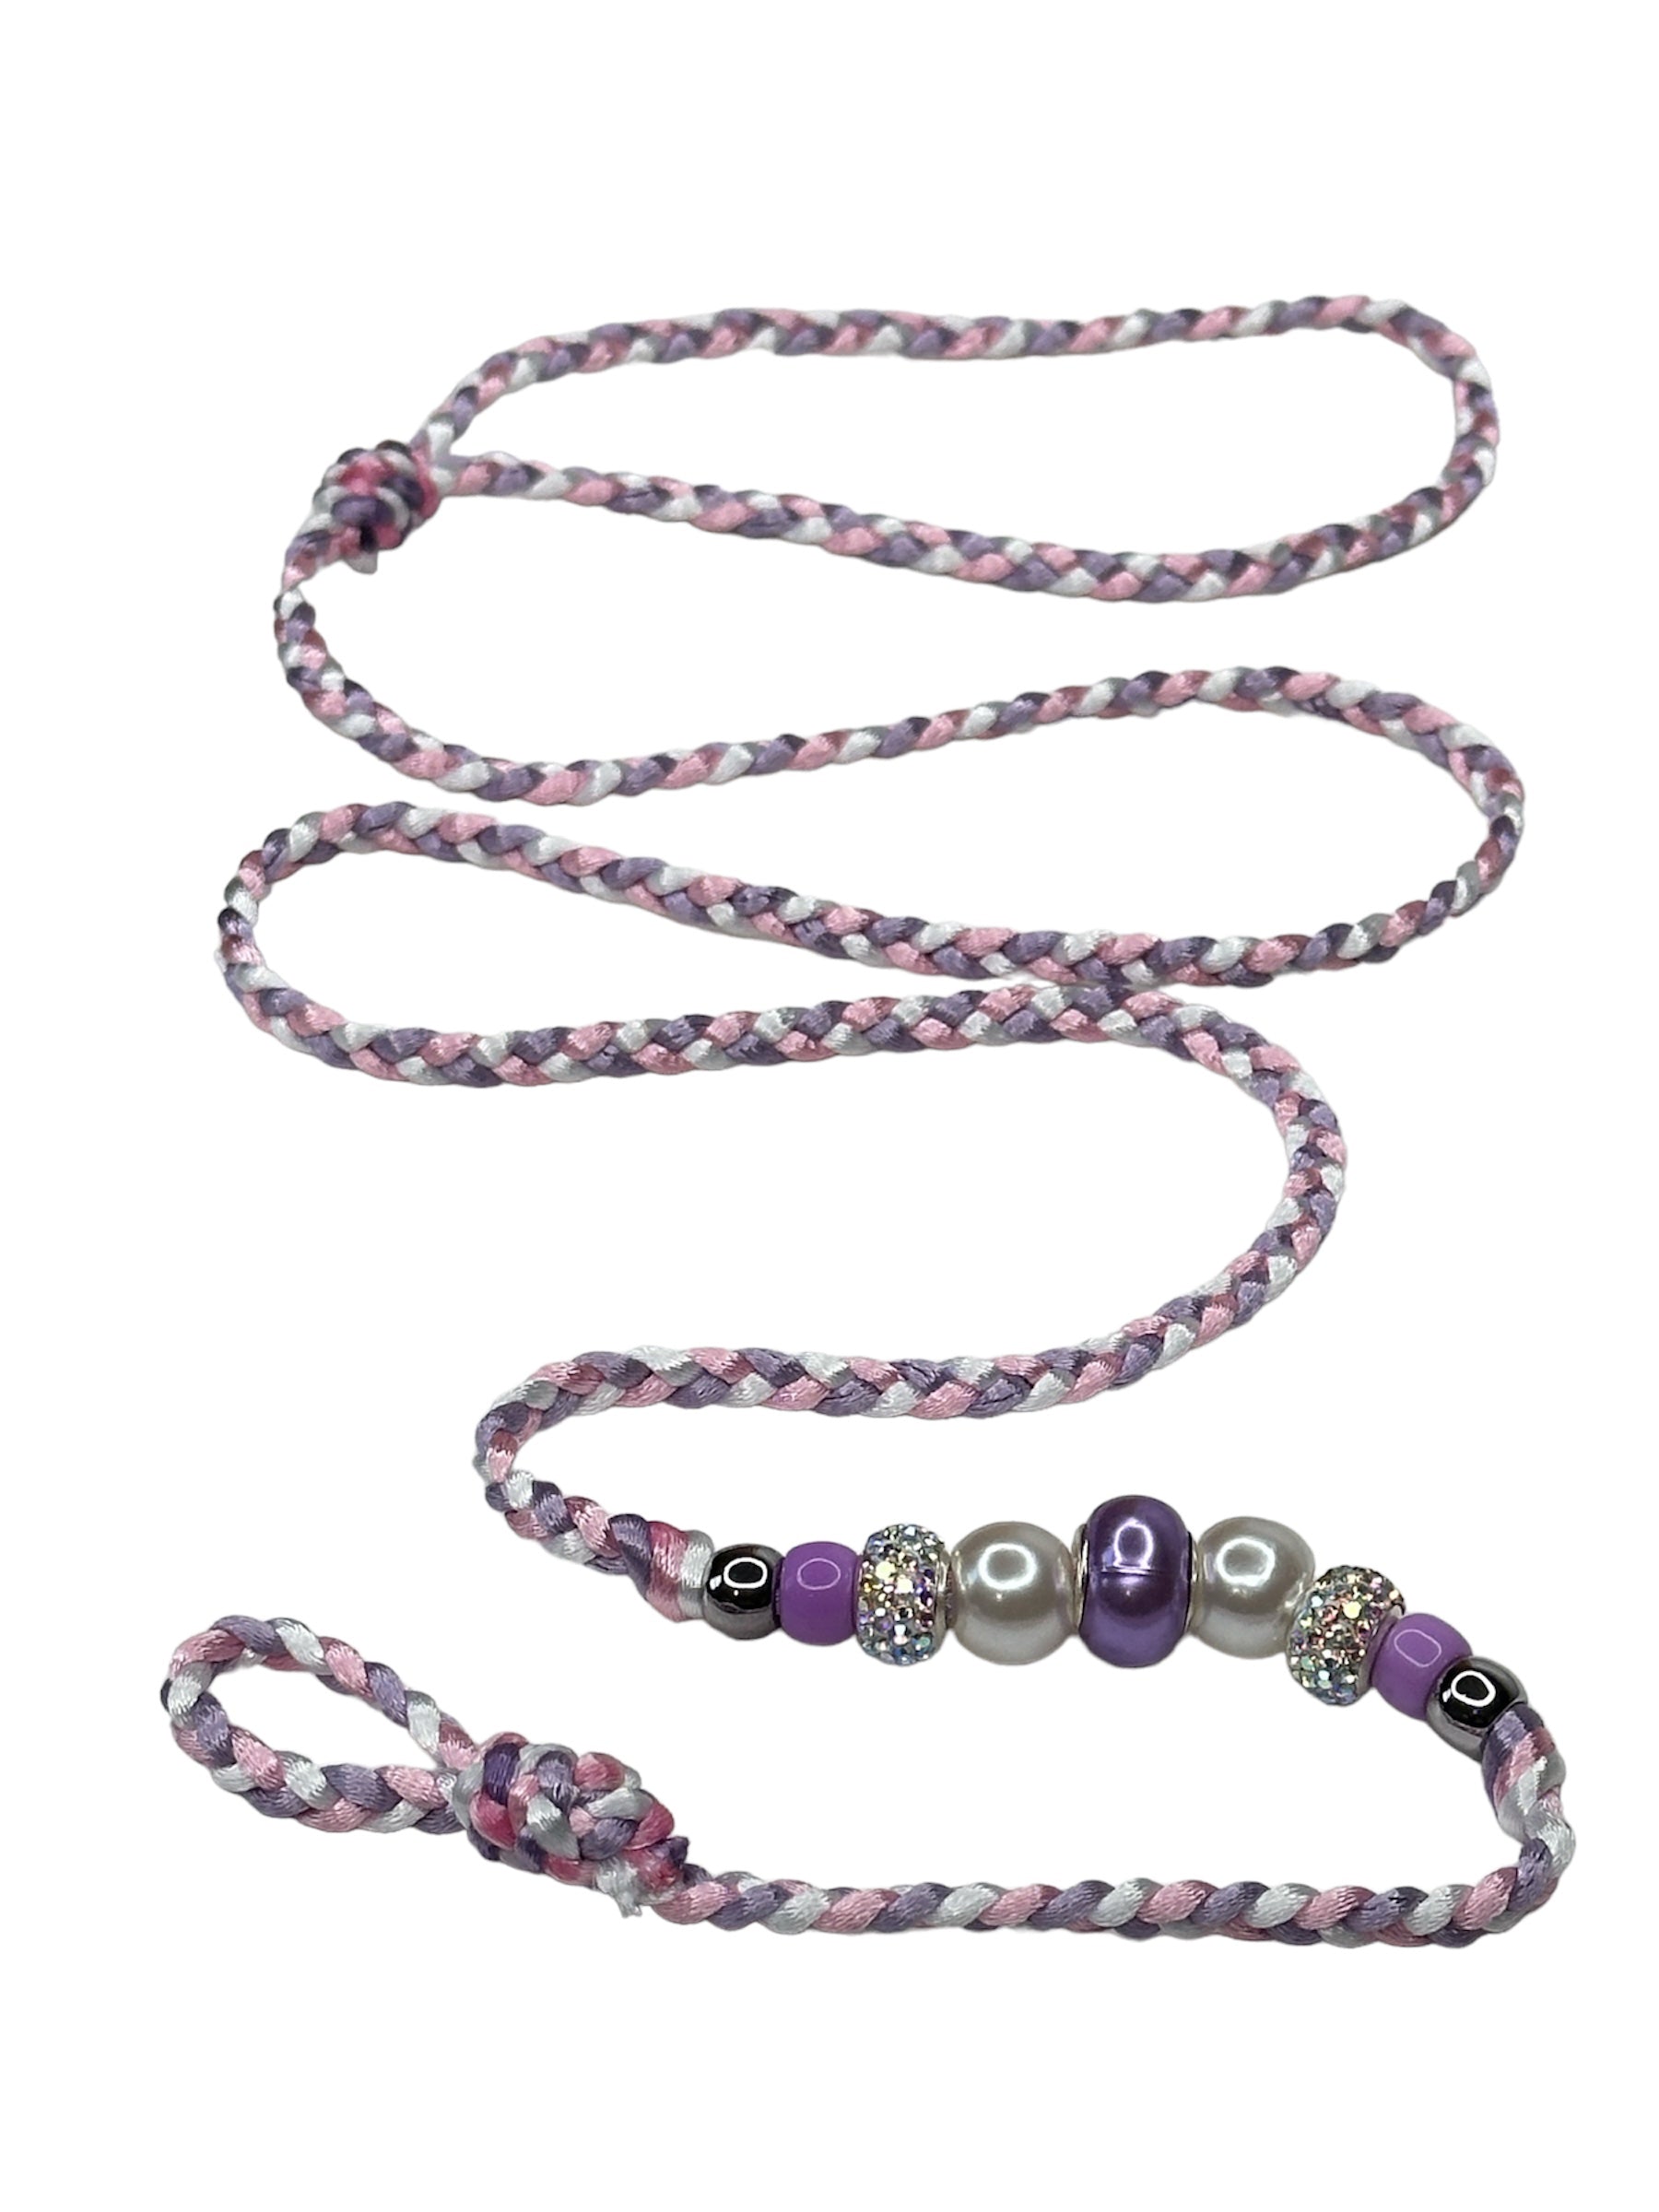 Satin Show Leads 36" Pink/Silver/Purple